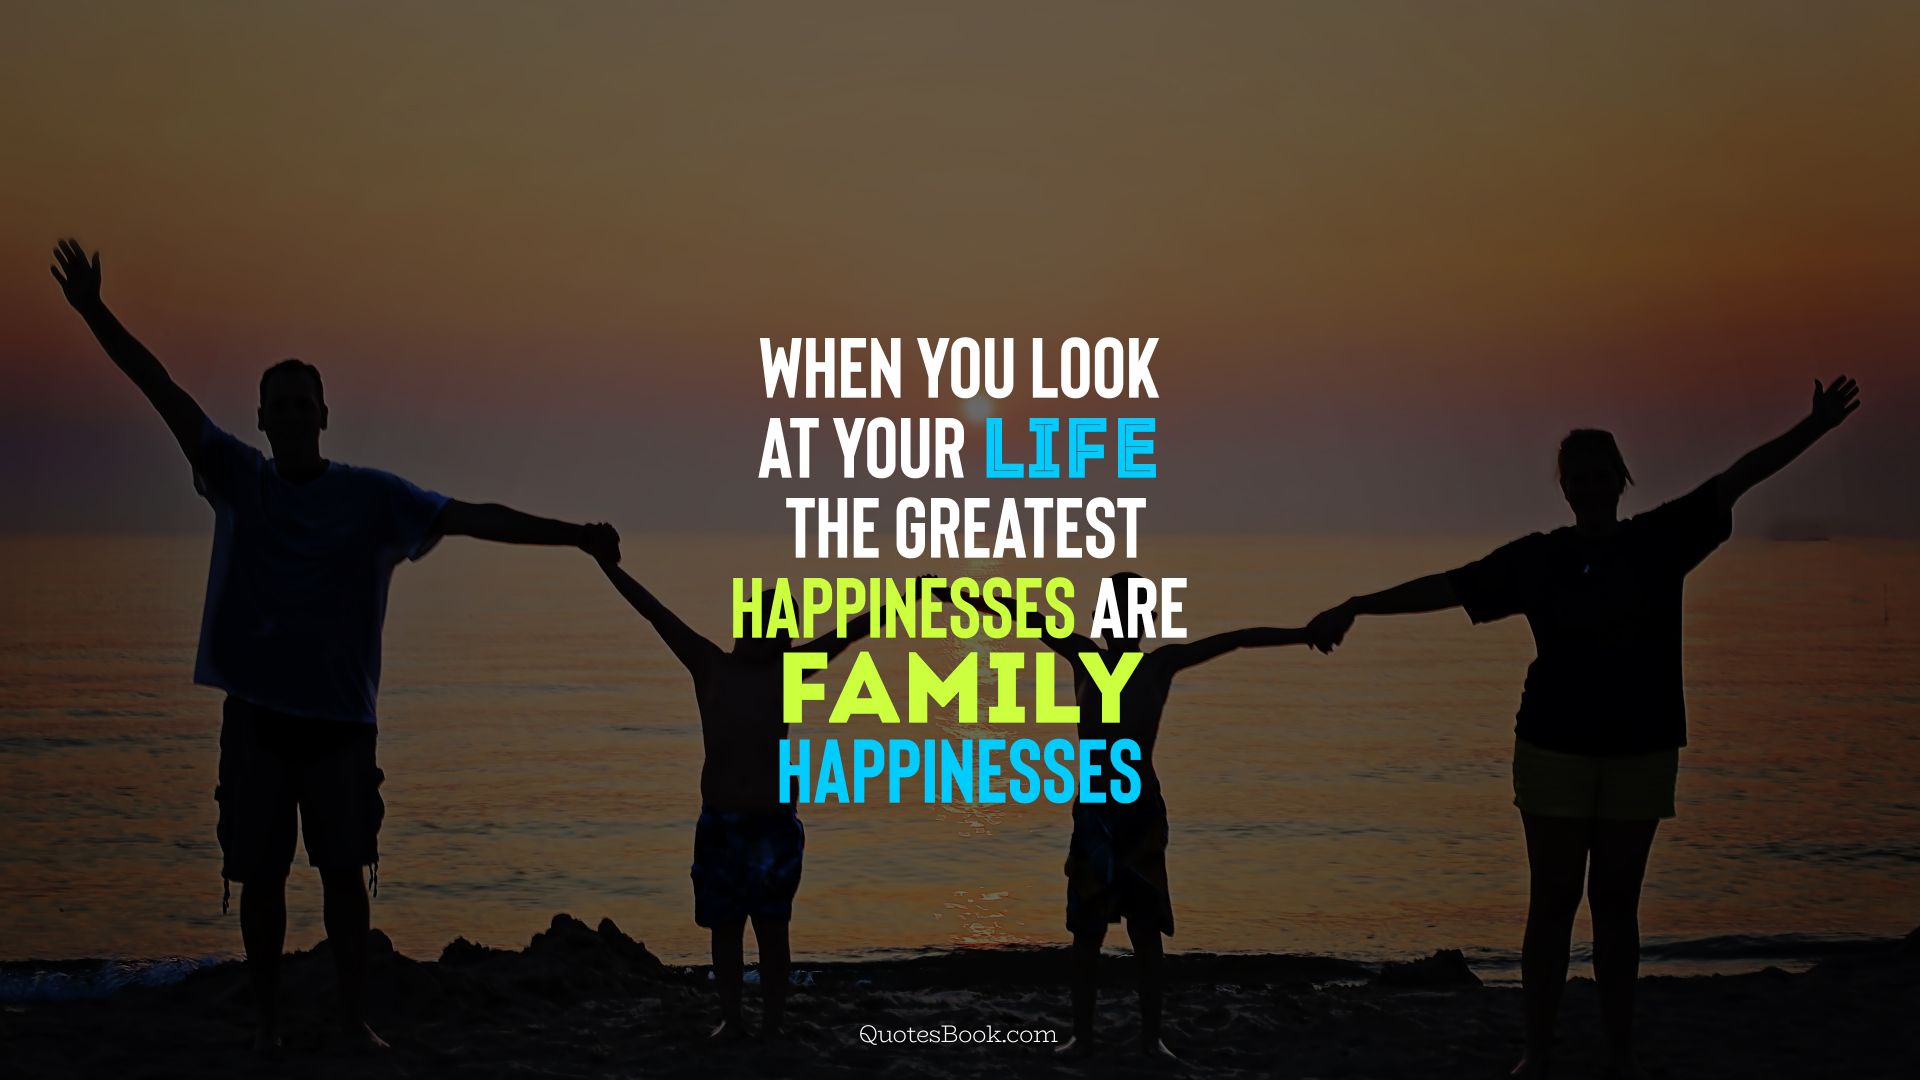 When you look at your life the gratest happinesses are family happinesses 